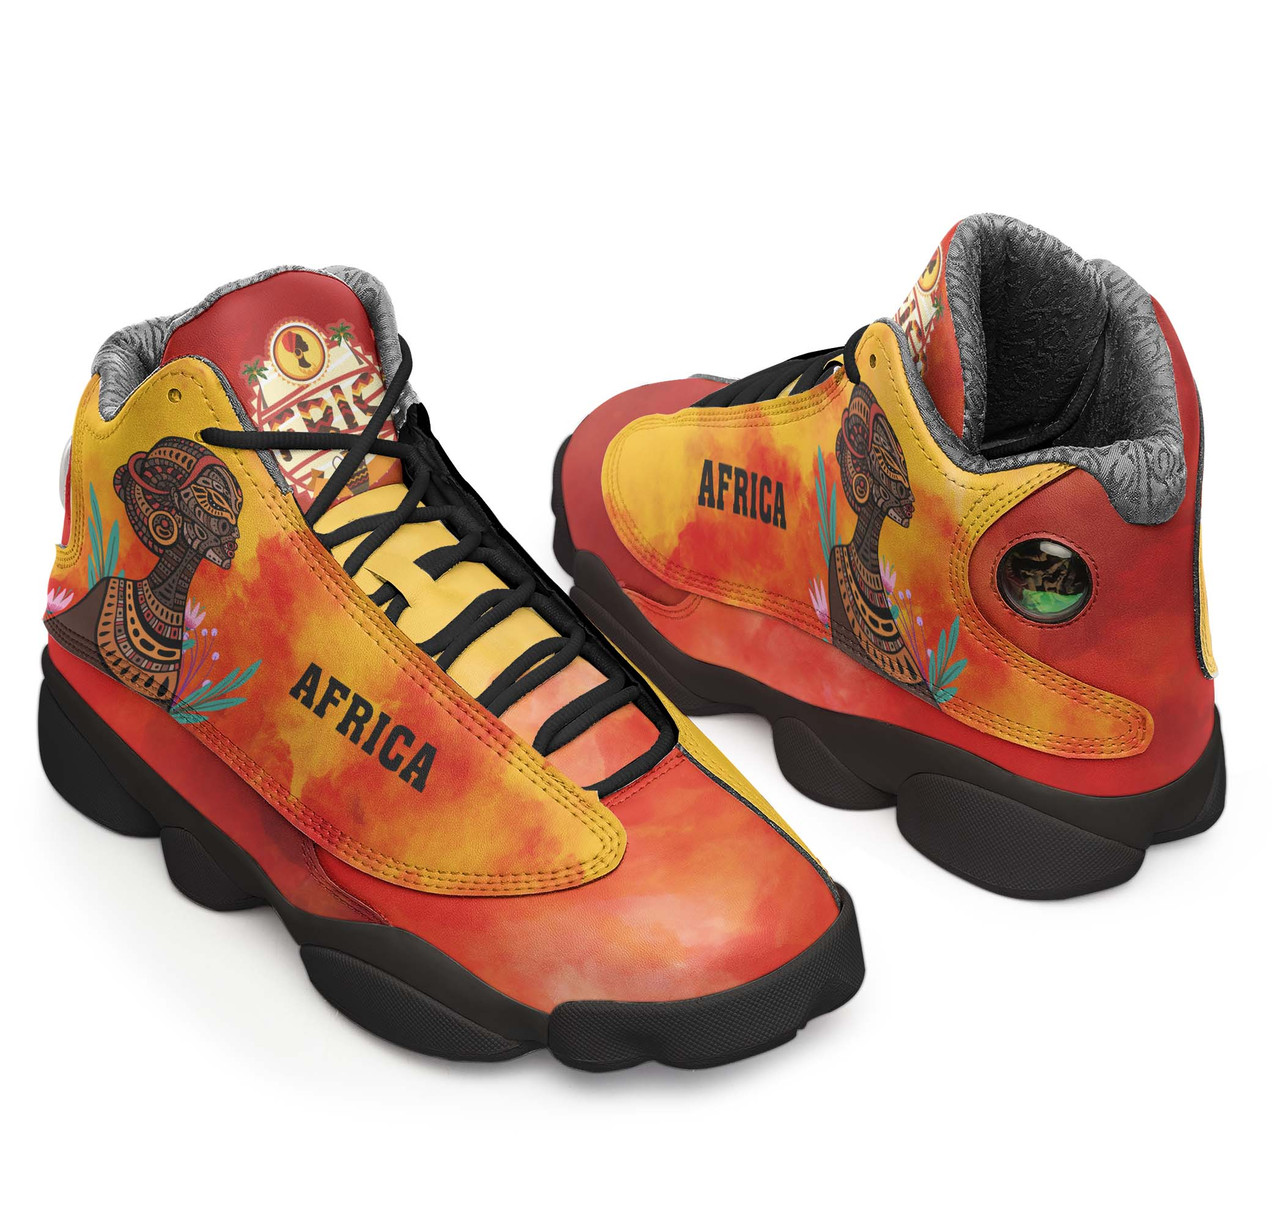 African Woman High Top Basketball Shoes J 13 - Custom Celebrate Africa's Woman's Day Culture with African Girl Woman High Top Sneakers J 13